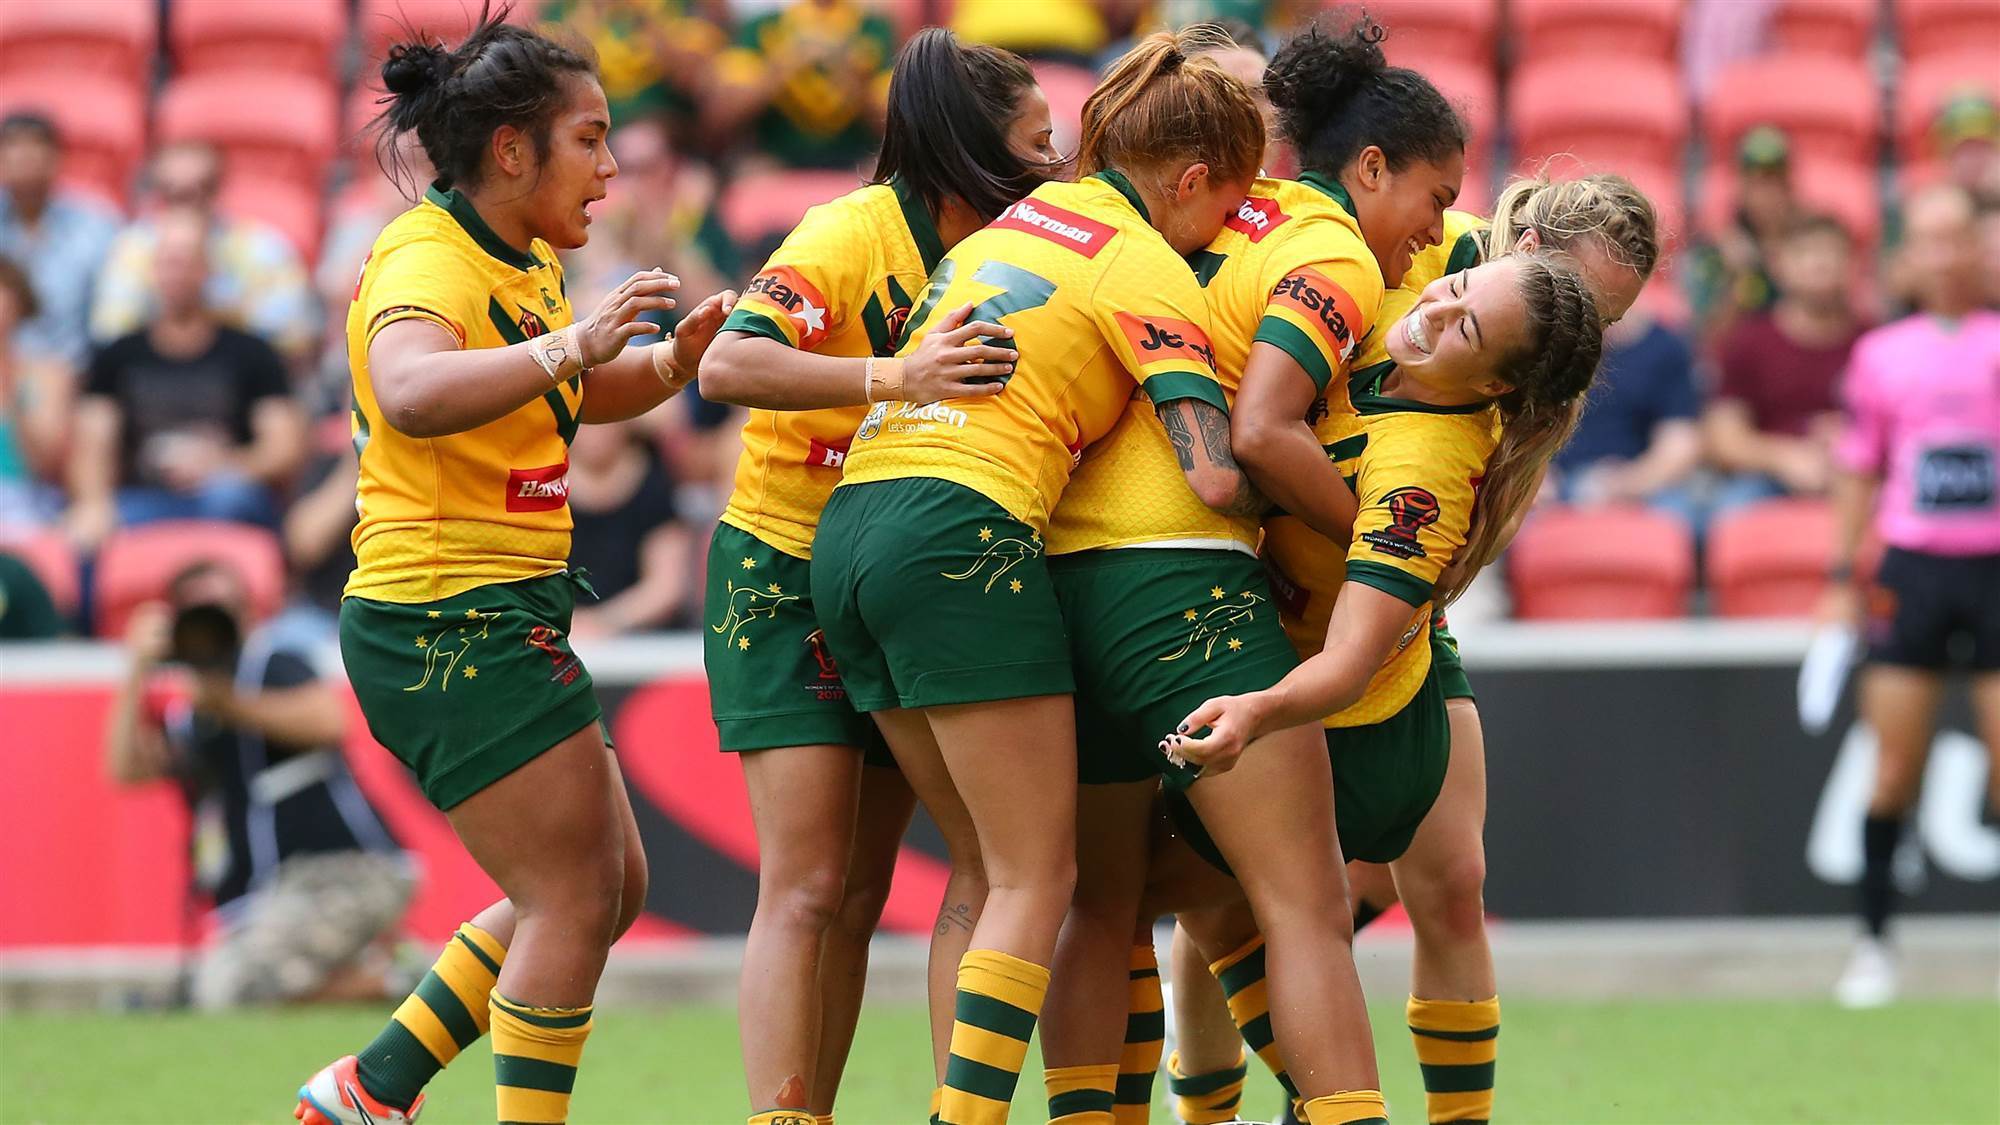 5 things to know about the women's NRL competition The Women's Game